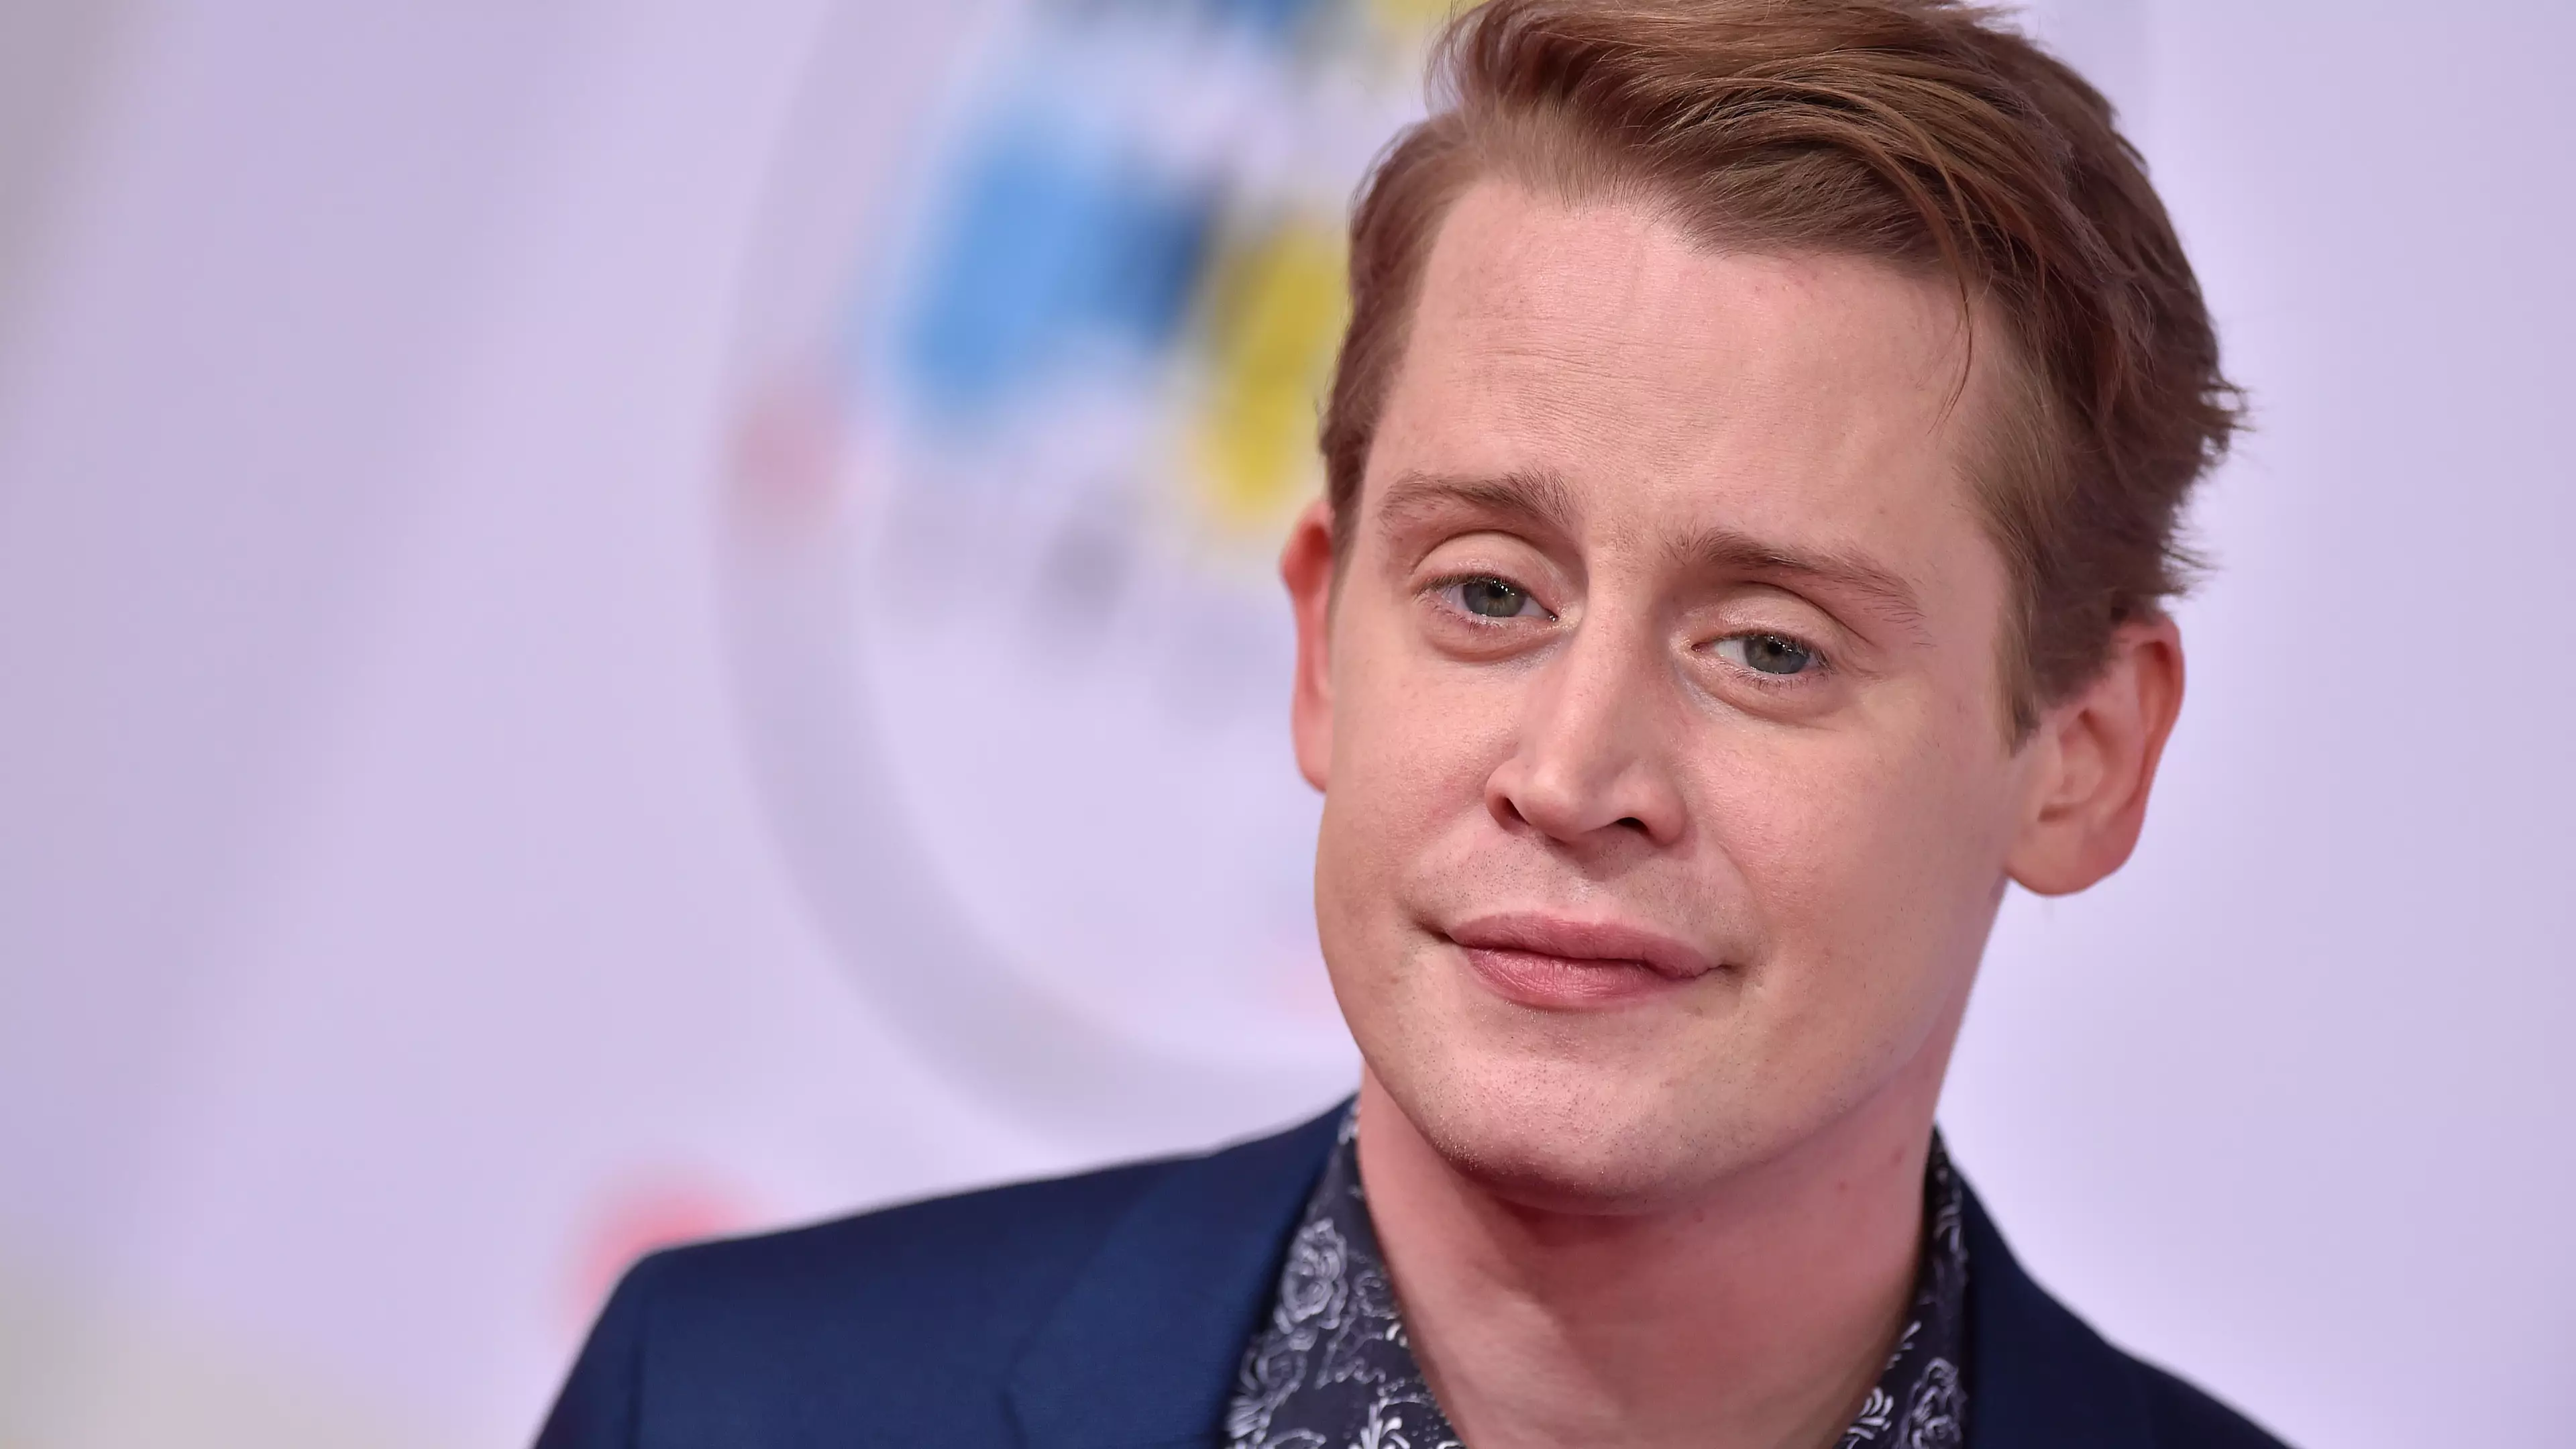 Macaulay Culkin And Kathy Bates Will Have 'Crazy Sex' In American Horror Story